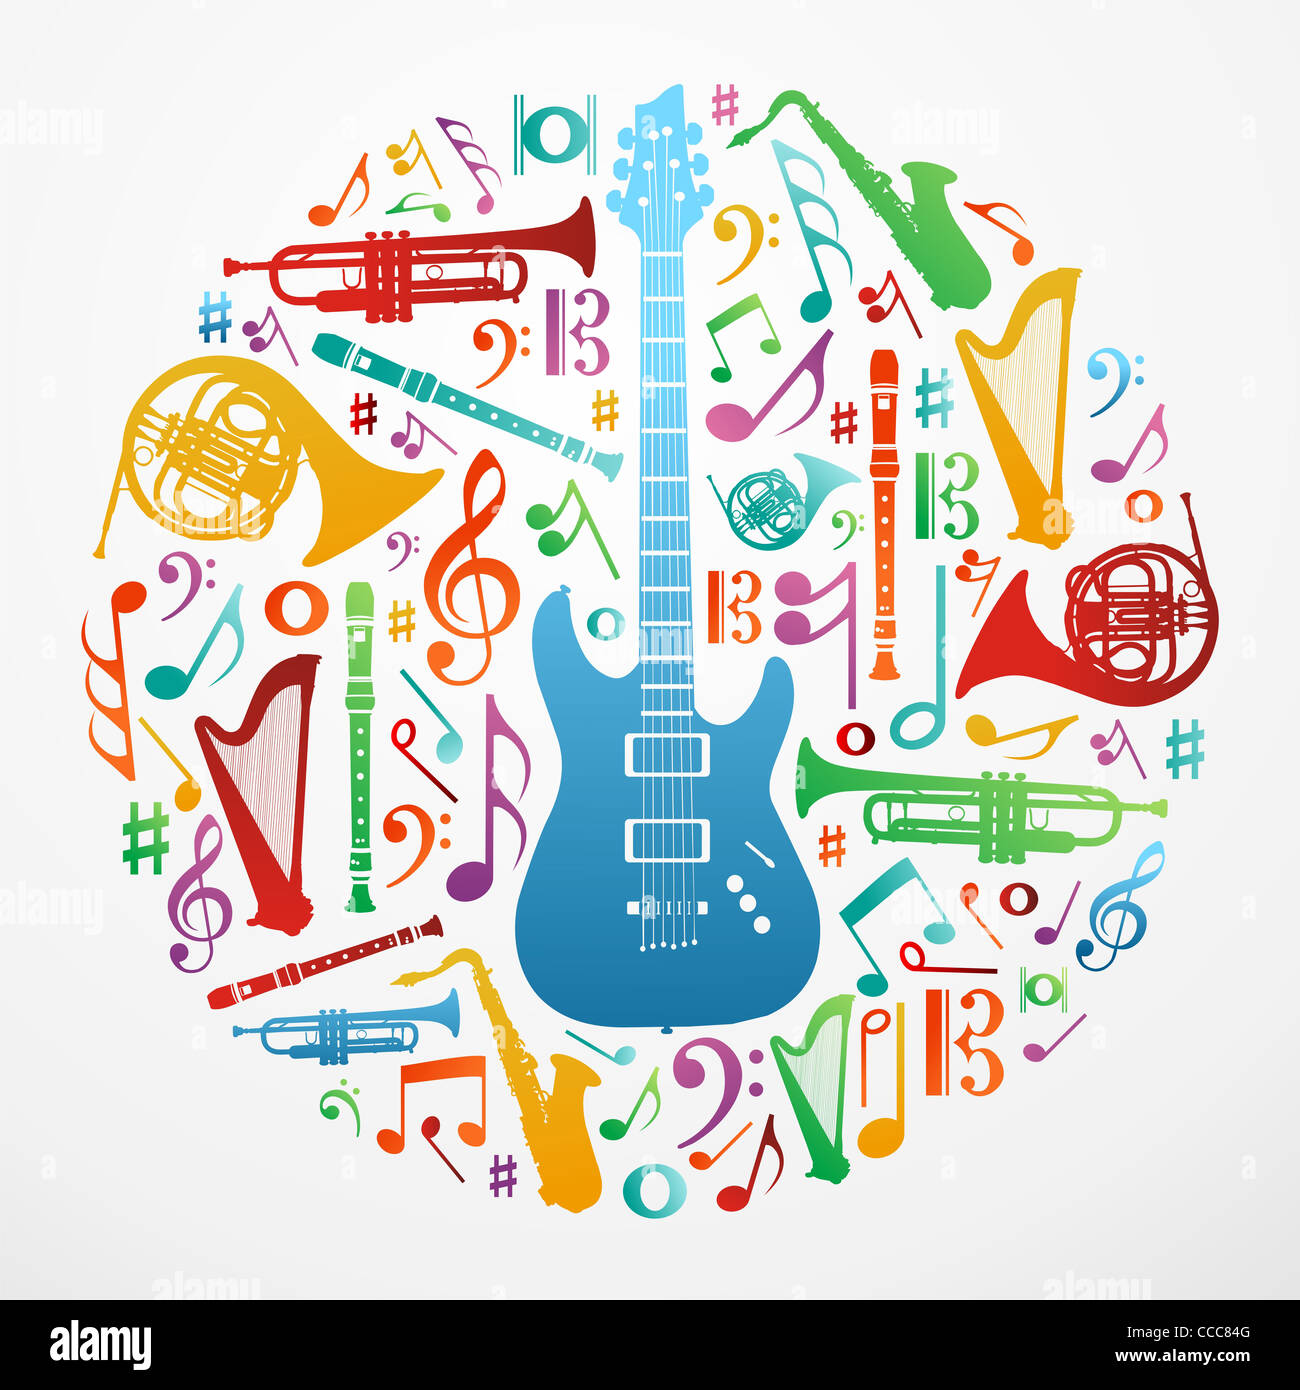 Multicolored music instruments silhouette in circle shape. Vector file available. Stock Photo